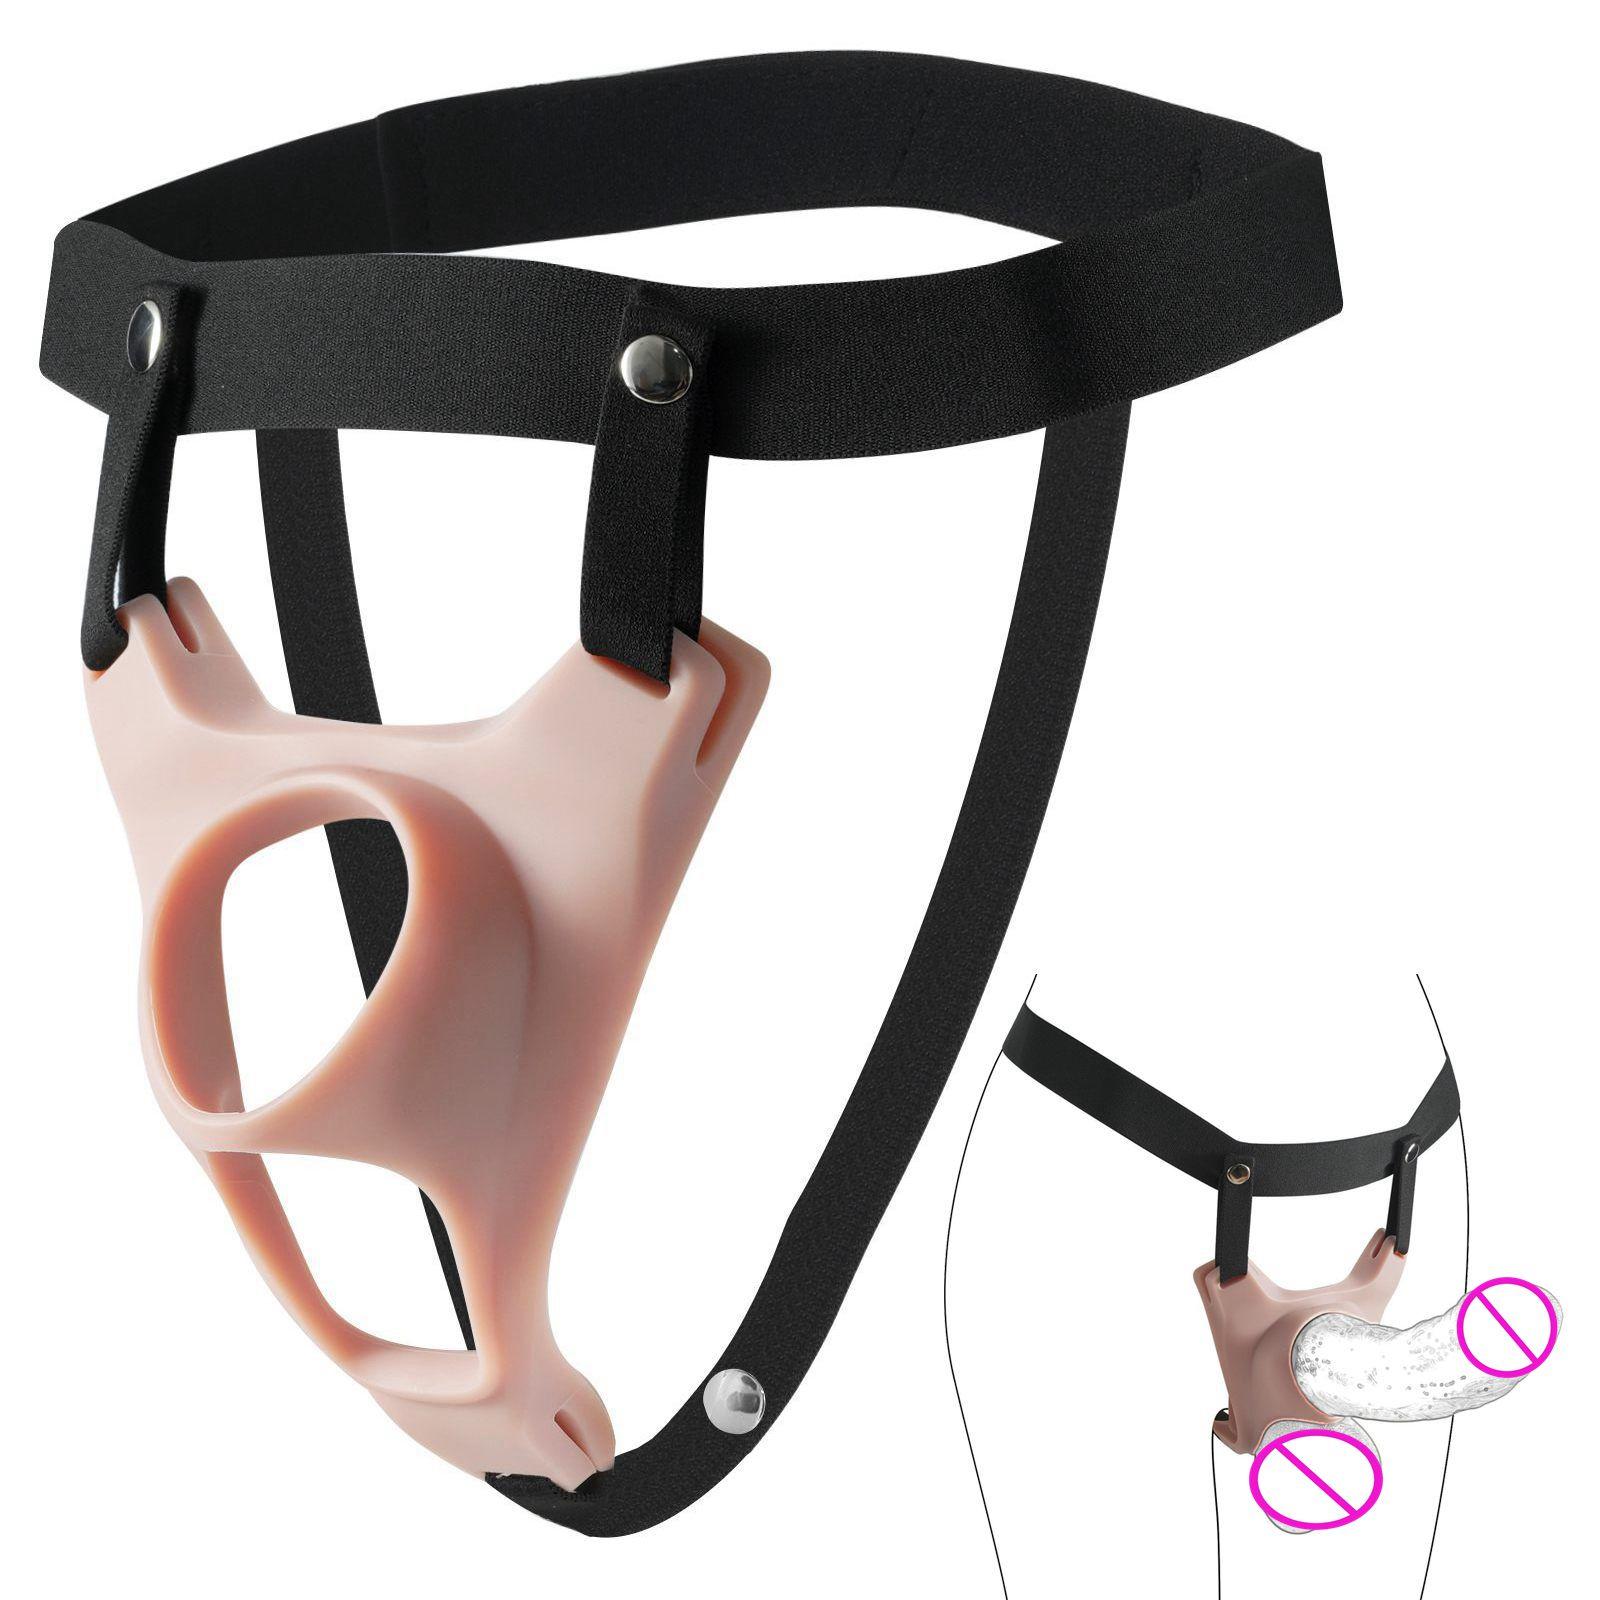 Realistic Hollow Strap On Dildo Holder Wearable Dildo Elastic Harness Panty Dildo Dong Sm Belt Sex Toys For Women Lesbian Couple